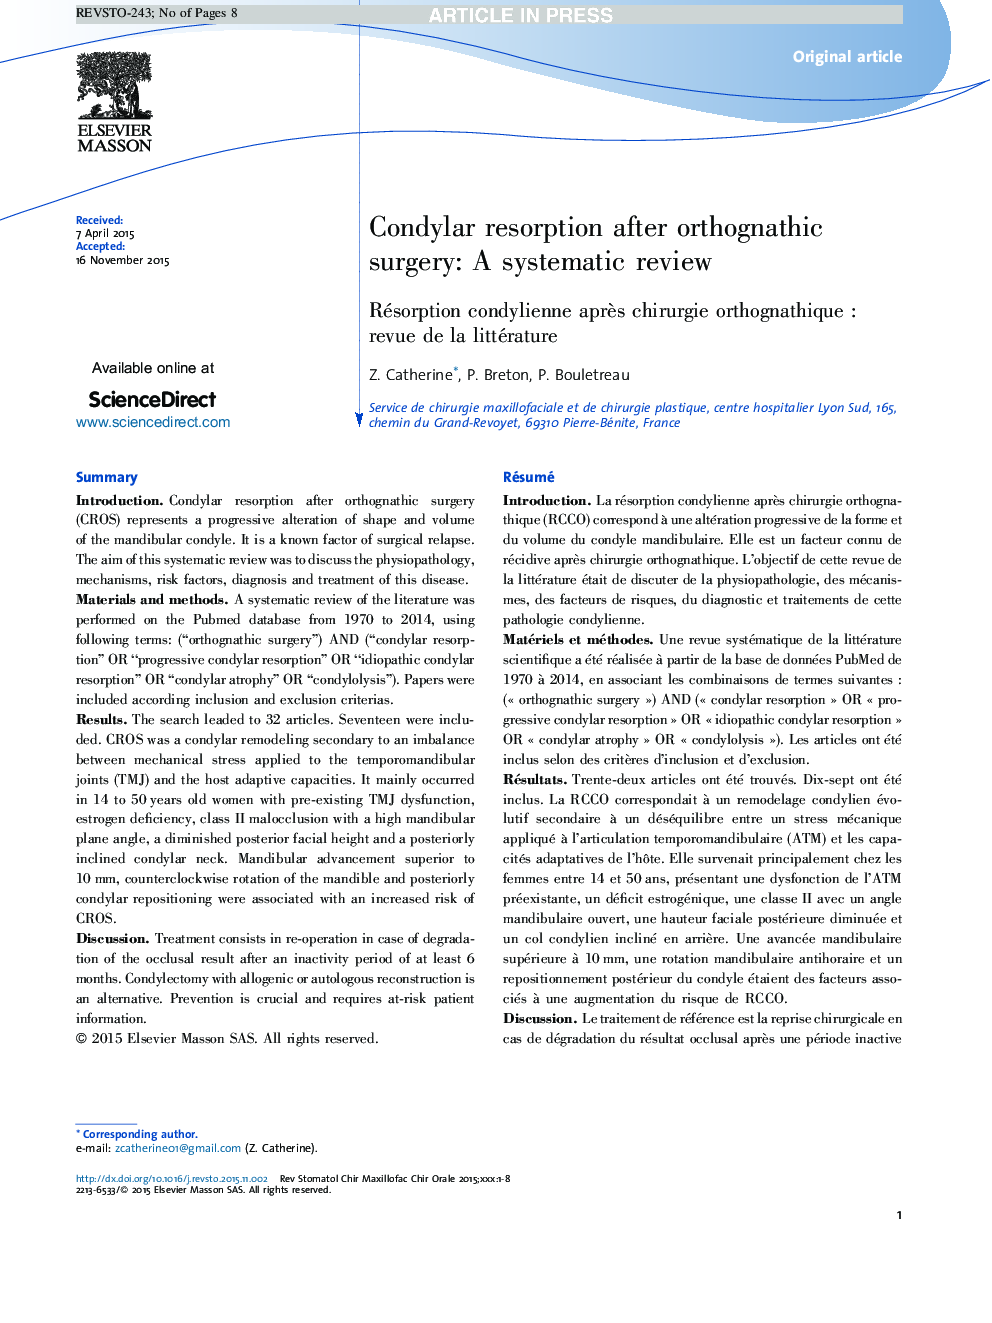 Condylar resorption after orthognathic surgery: A systematic review